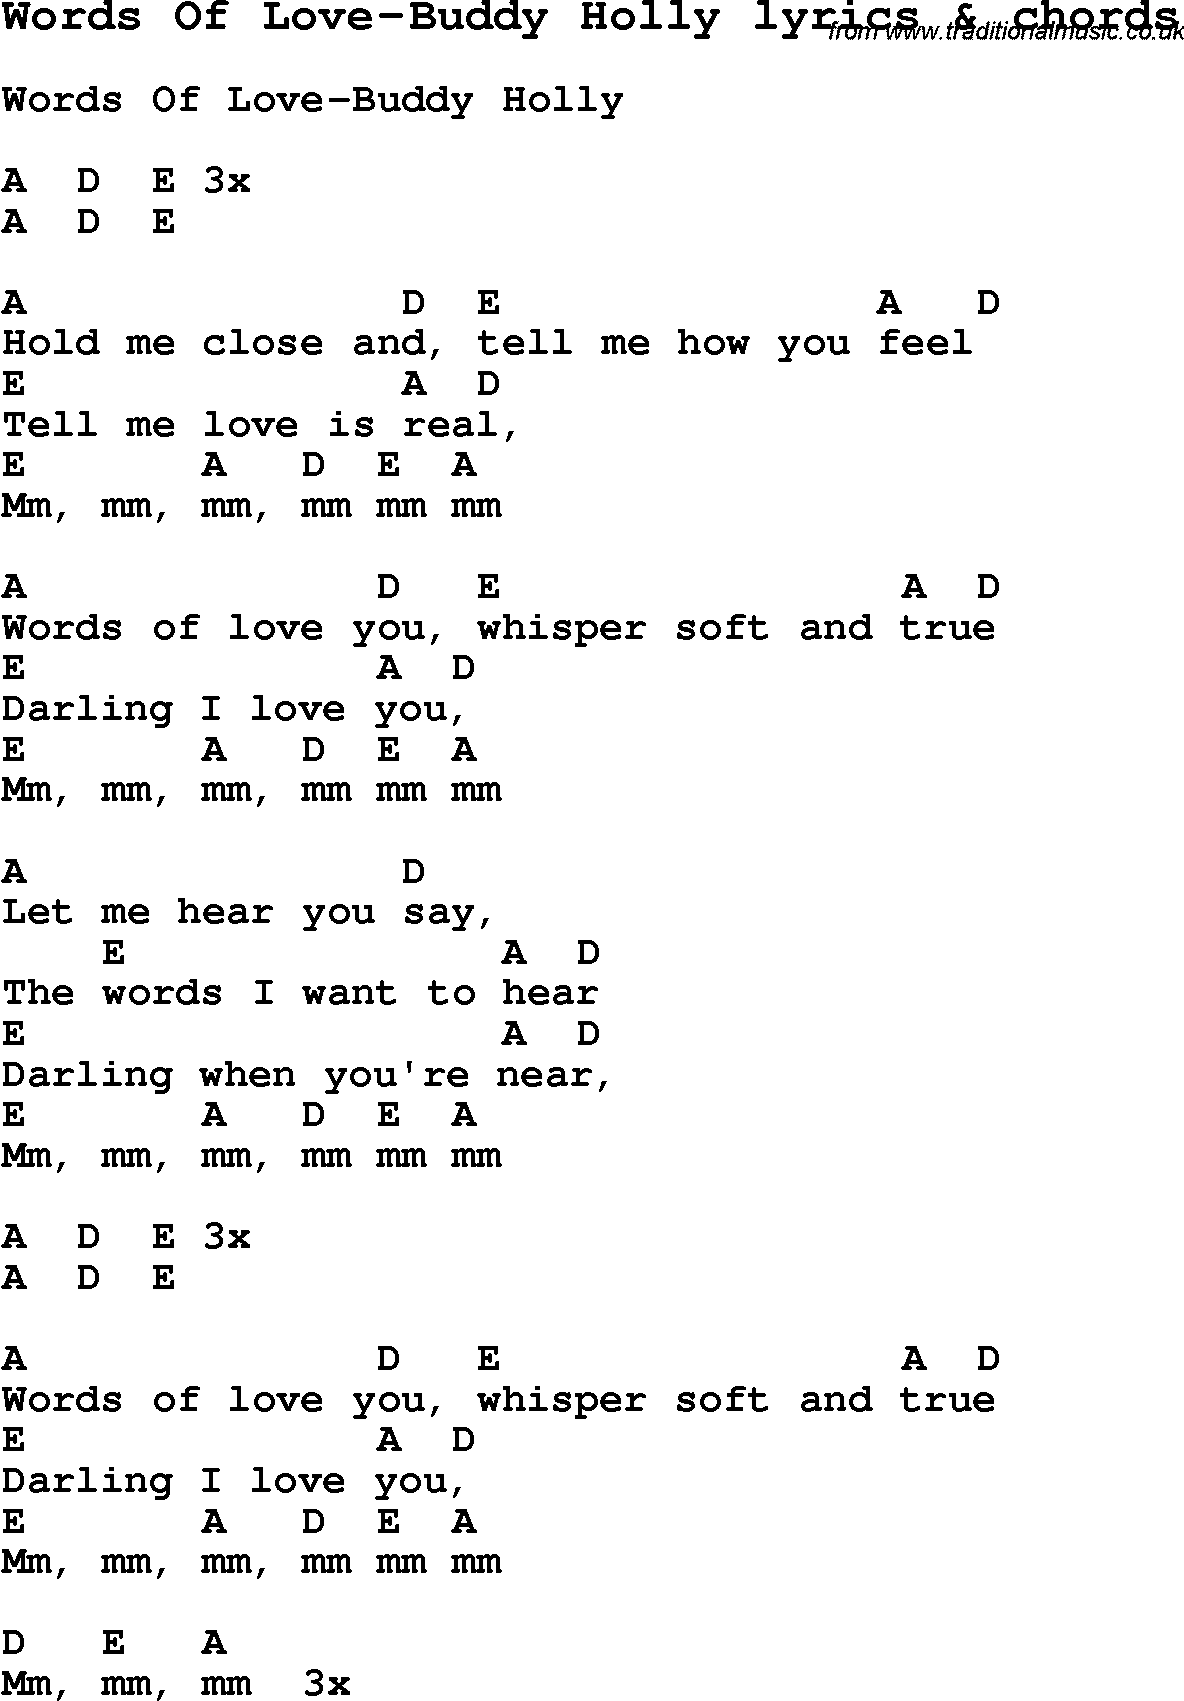 Love Song Lyrics for: Words Of Love-Buddy Holly with chords for Ukulele, Guitar Banjo etc.